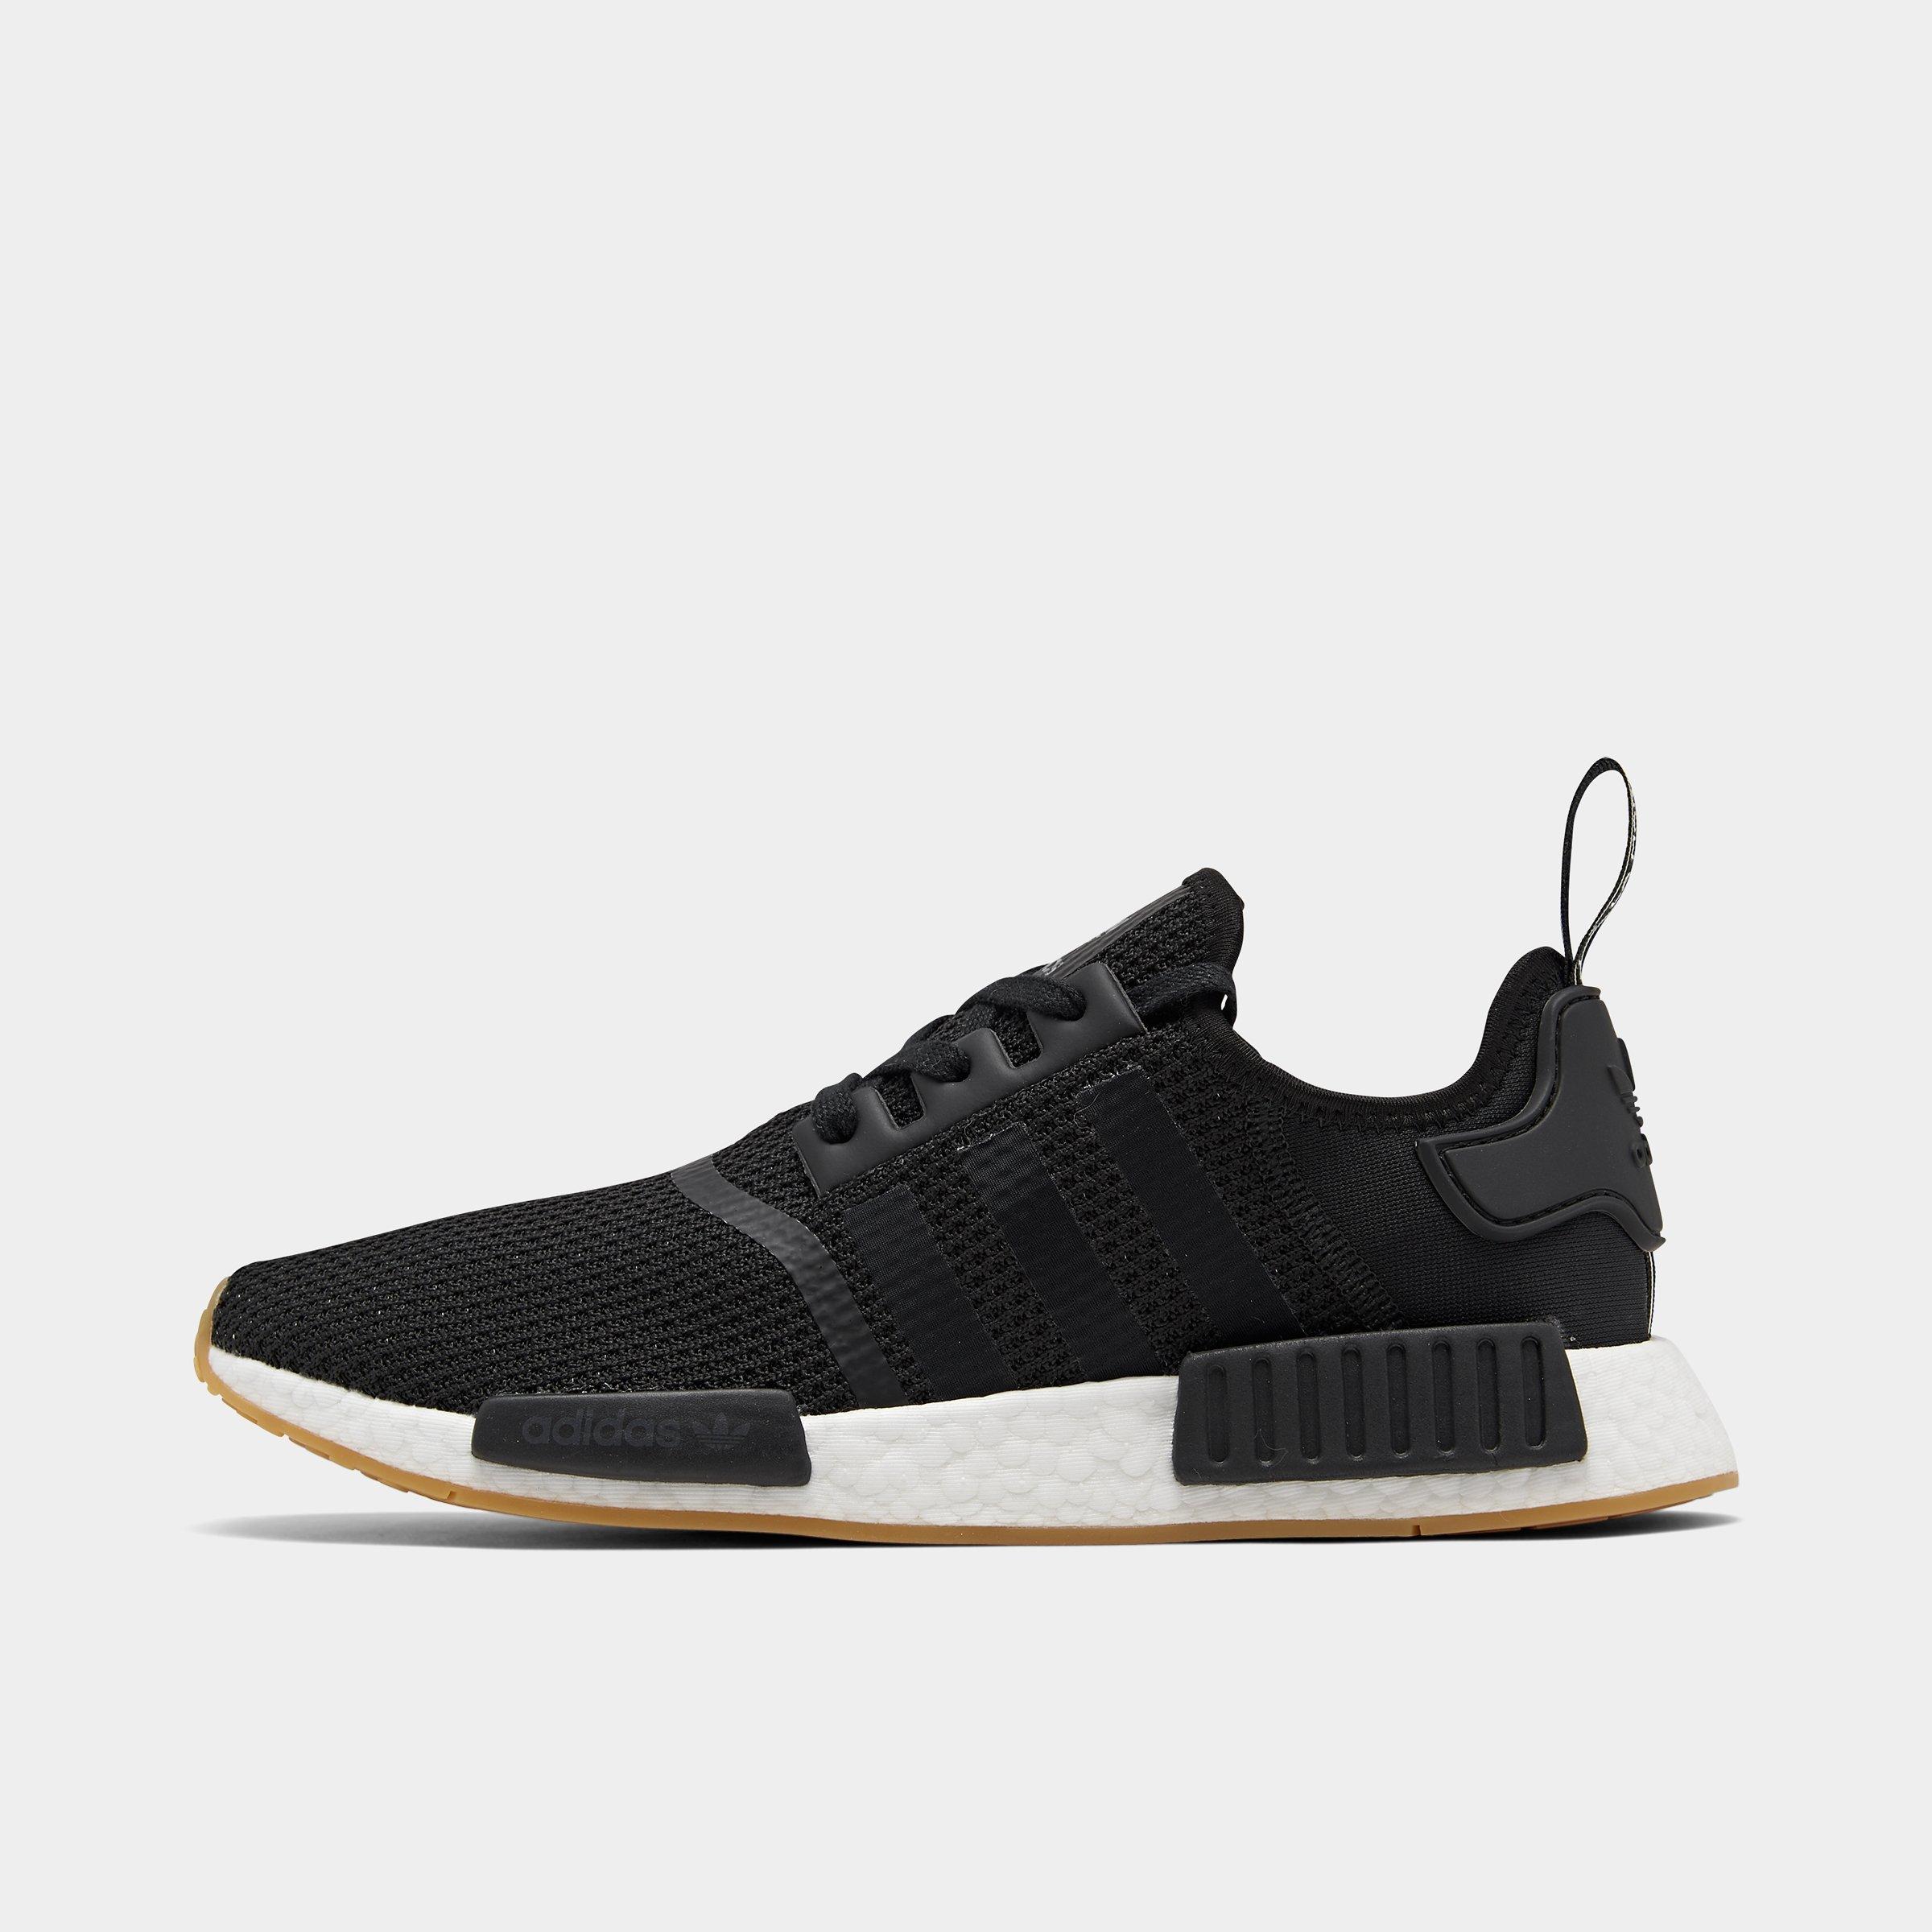 nmd r1 size 6.5